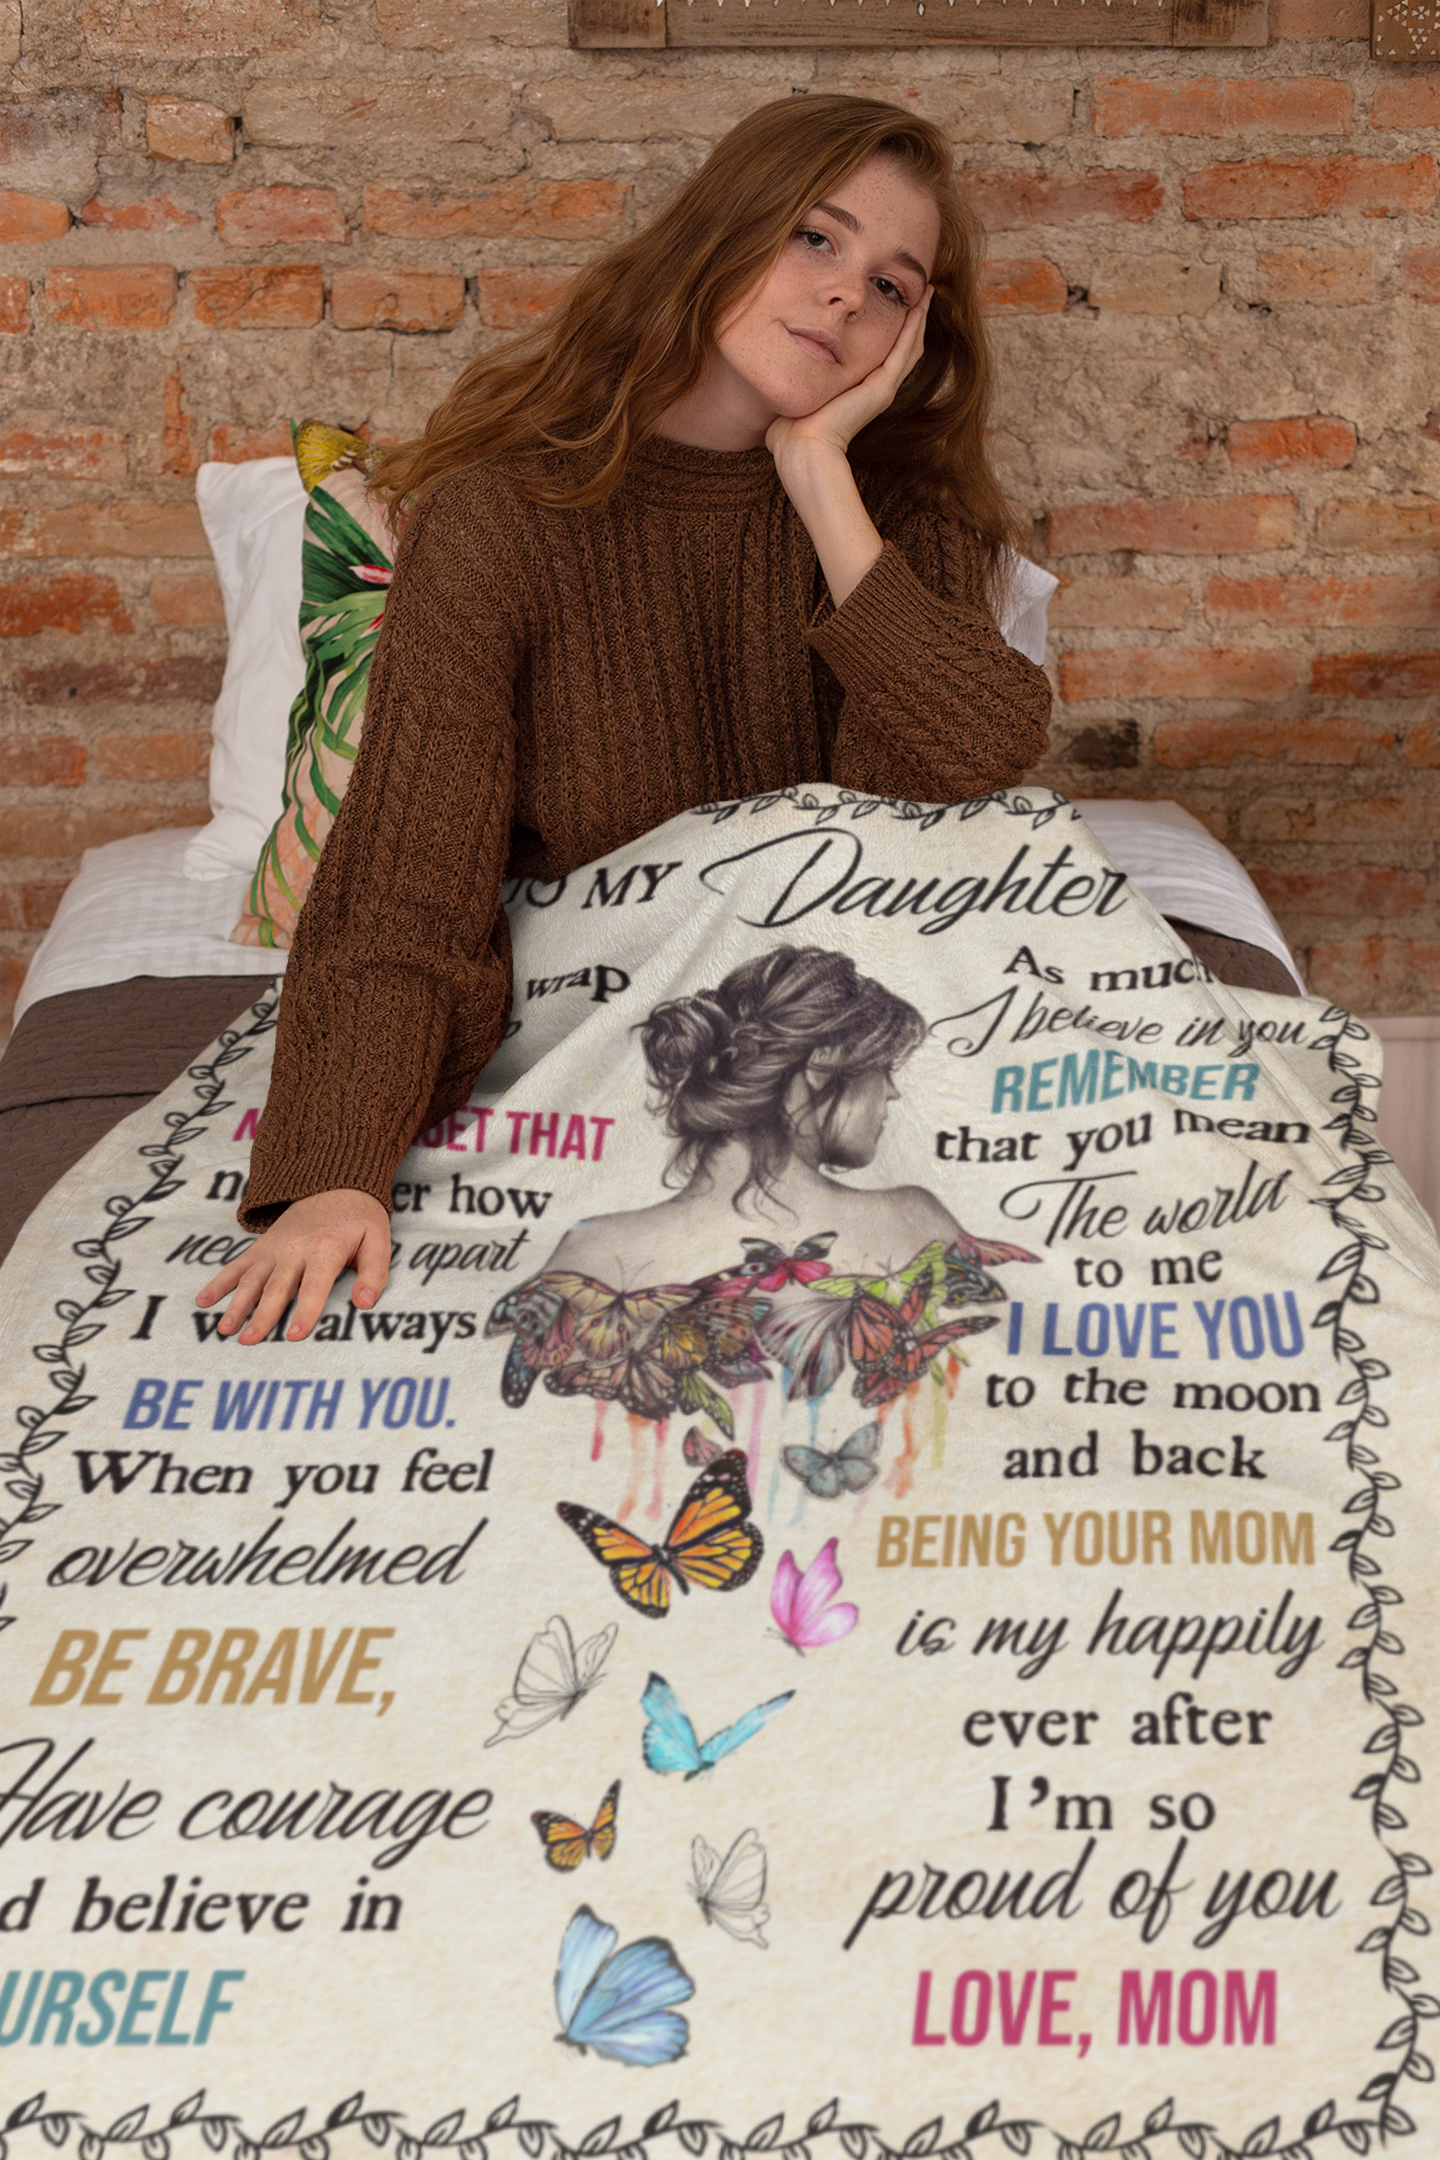 To My Daughter | Plush Throw Blanket | 50x60 - Thoughtful Blossom